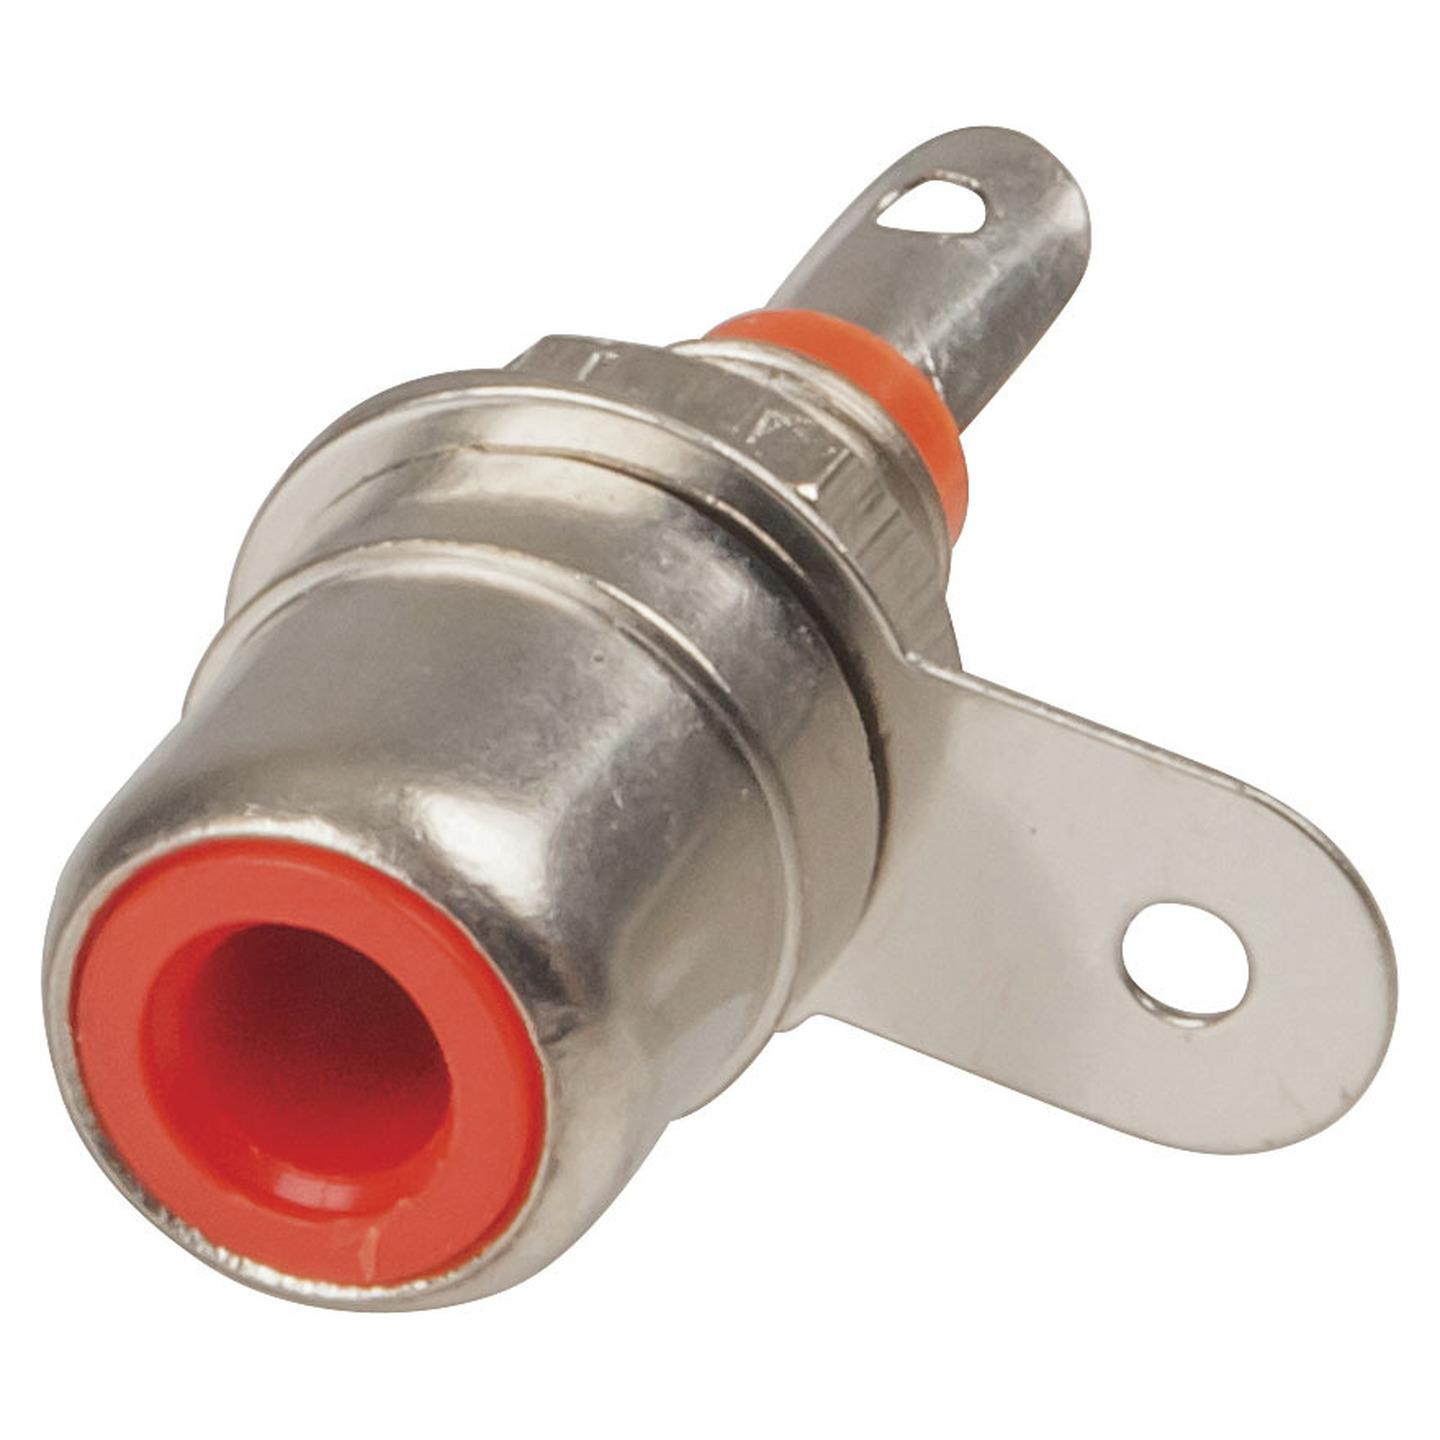 RCA Nickel Plated Chassis Socket - Red